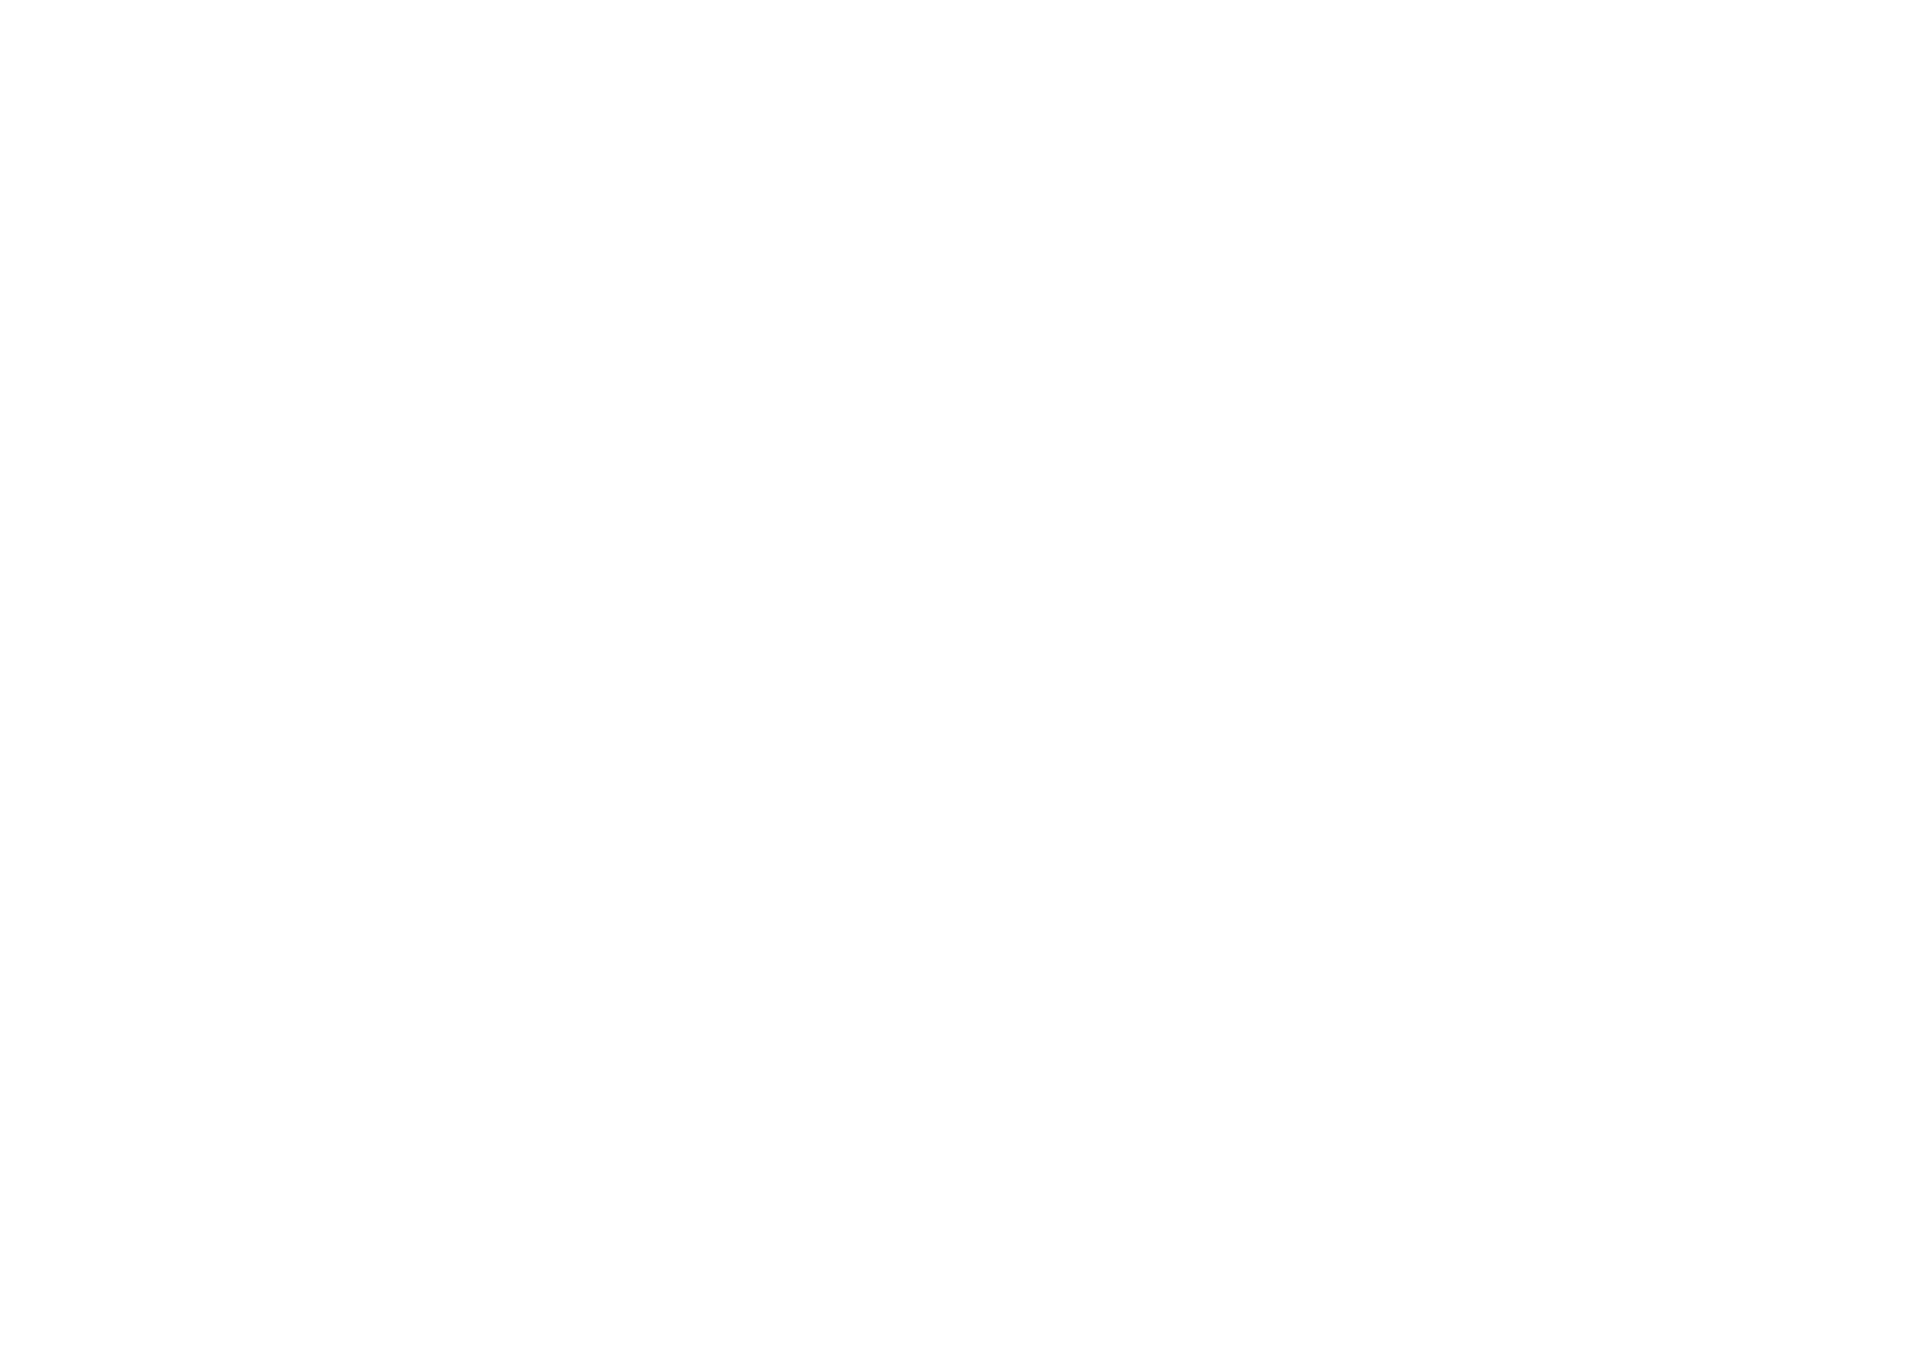 Gamez & Sons Funeral And Cremation Services Logo